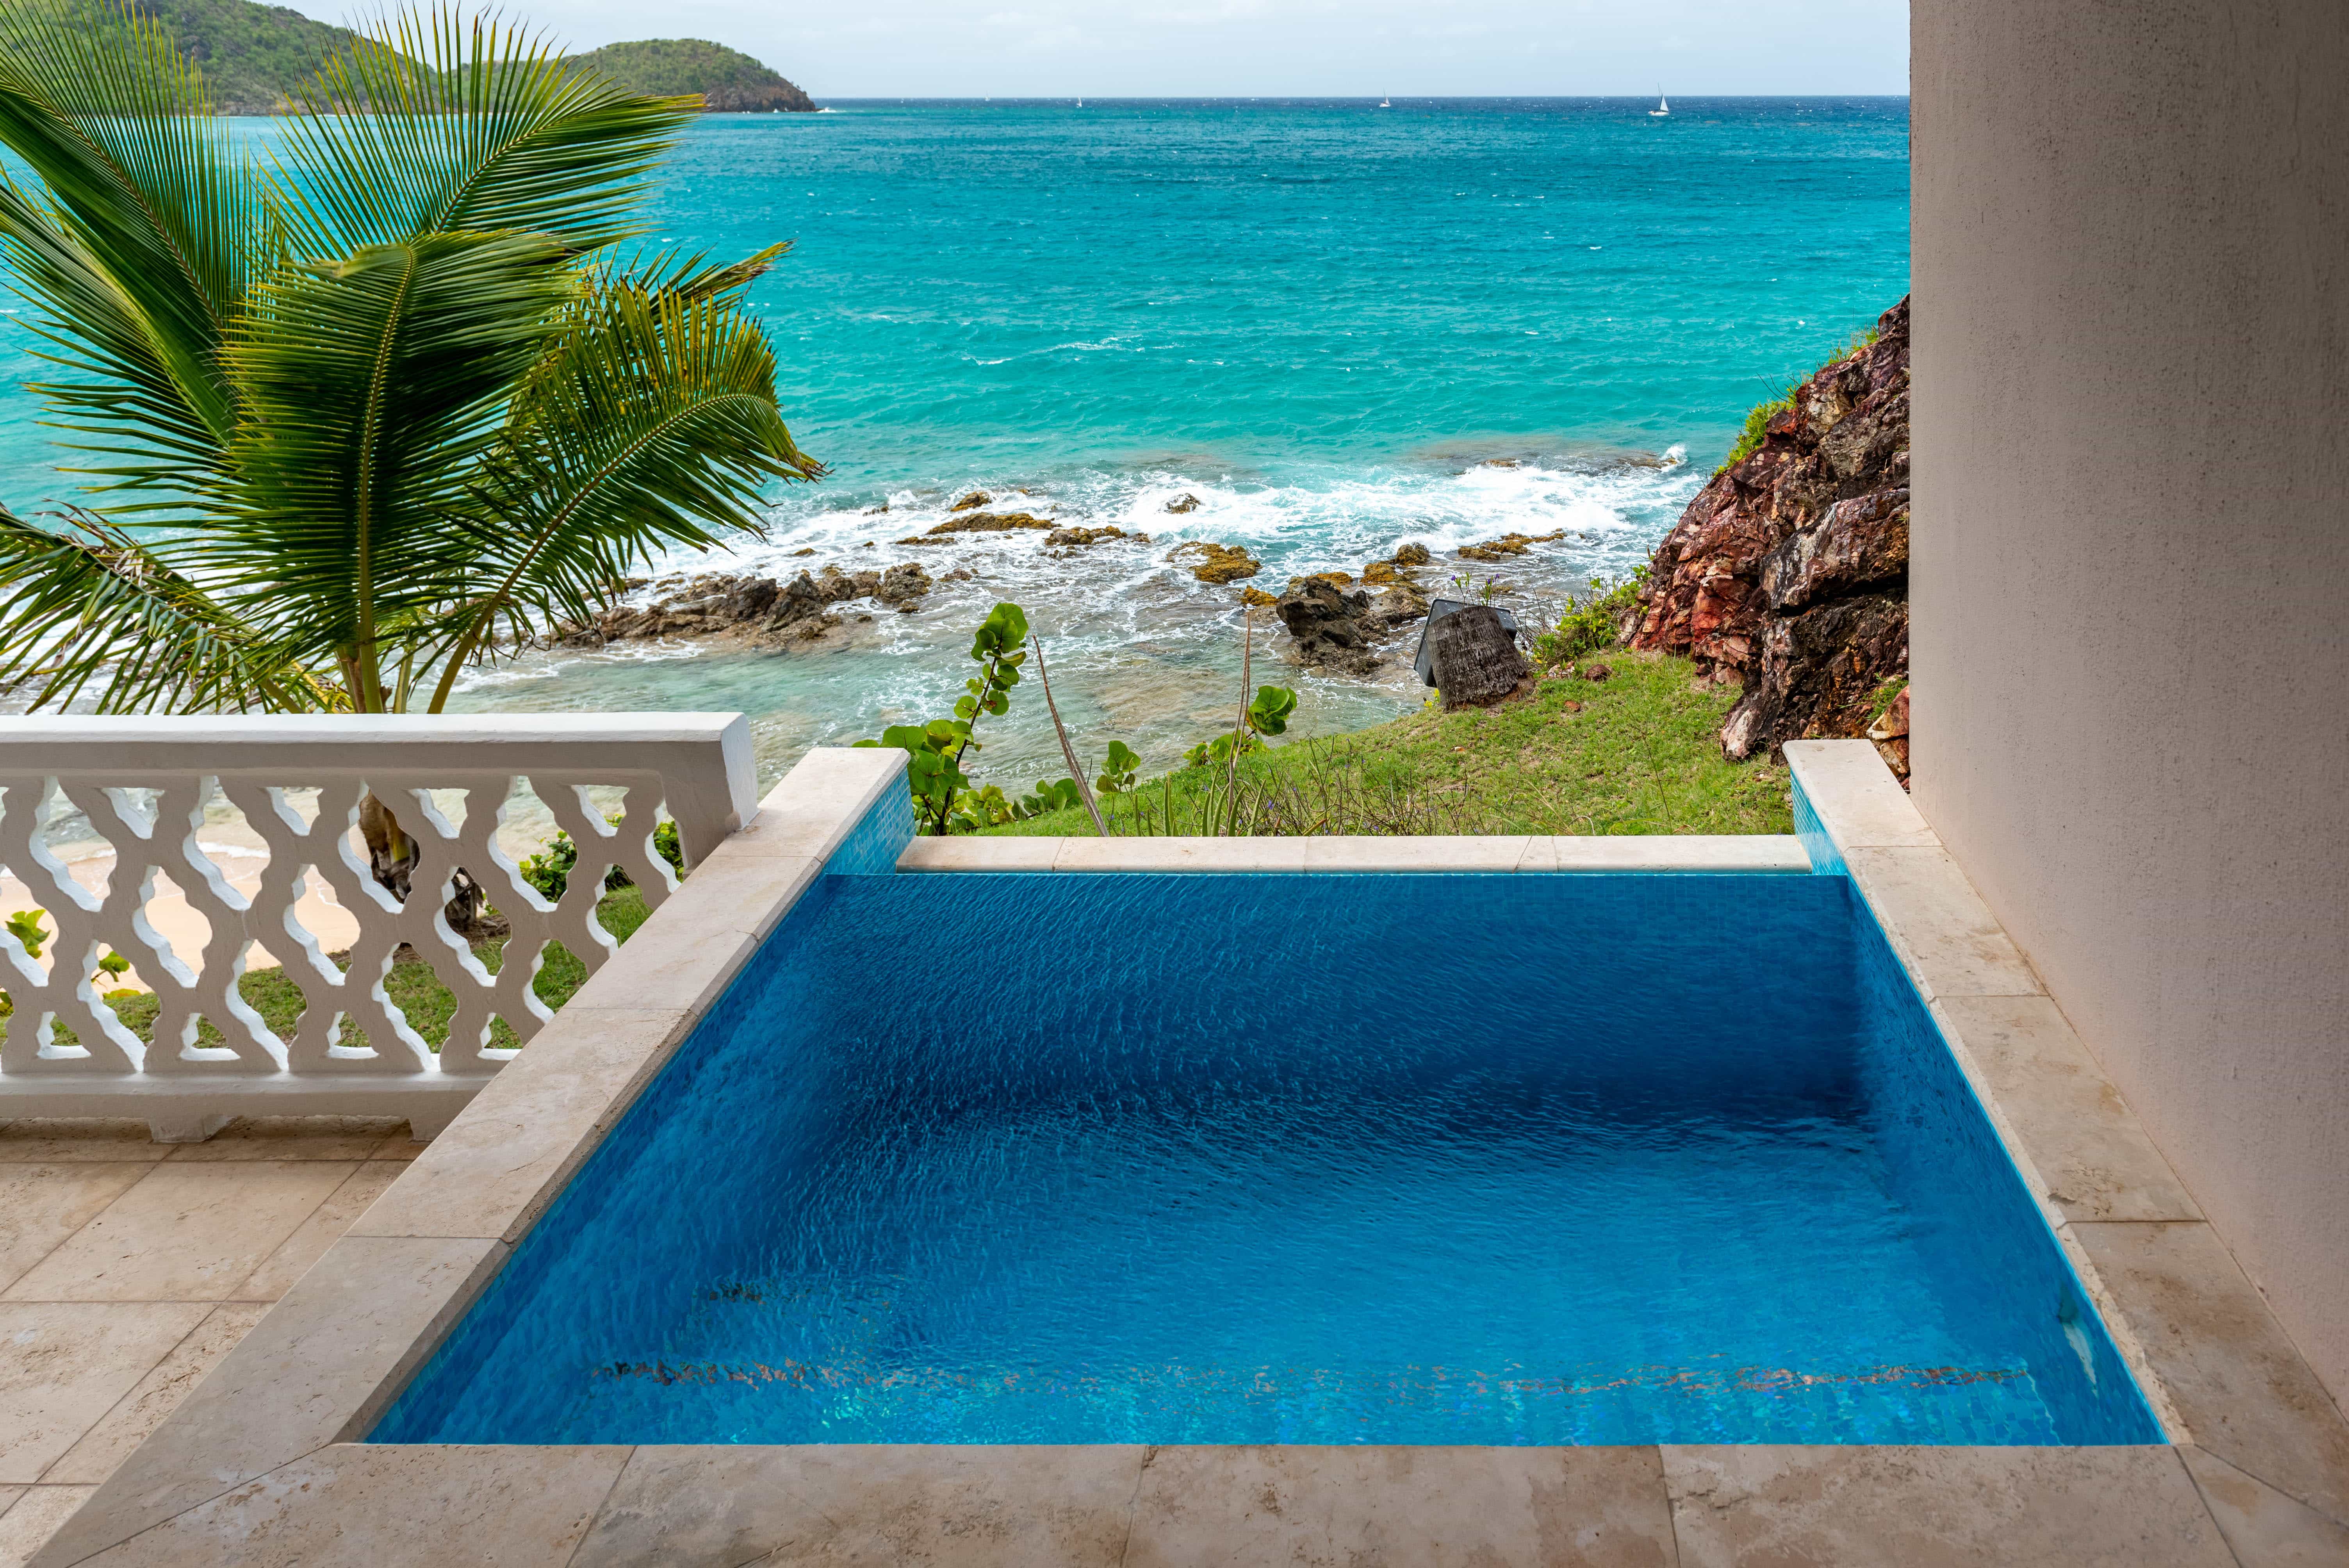 Some newly renovated rooms have plunge pools you may never want to leave.